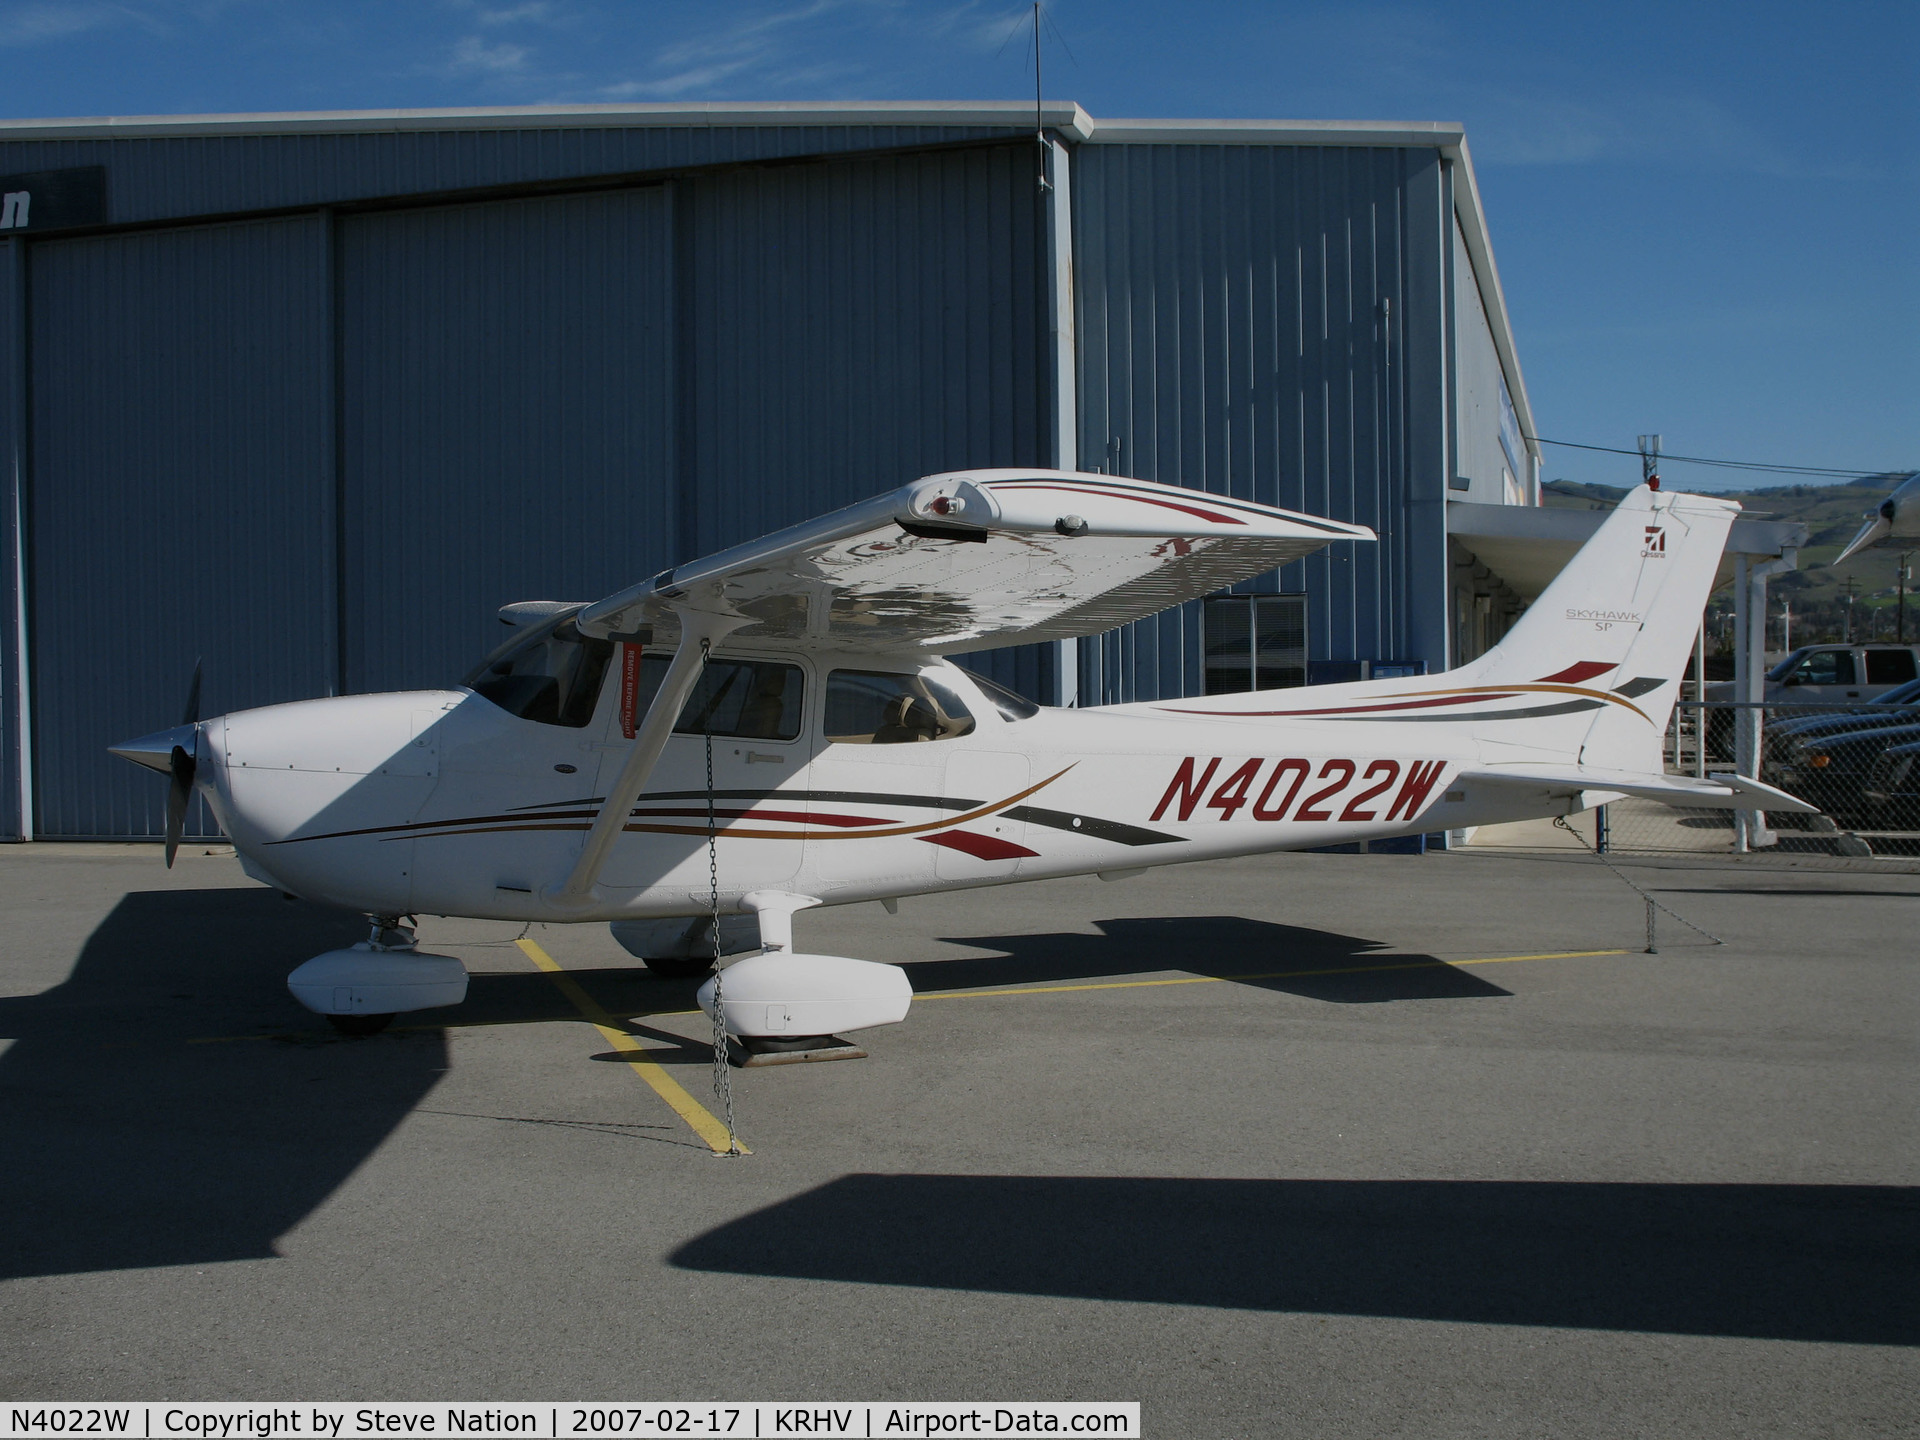 N4022W, 2006 Cessna 172S C/N 172S10131, Locally-based 2006 Cessna 172S Skylane @ Reid-Hillview Airport, San Jose, CA (to private owner Arlington Heights, IL 2008-07-21)